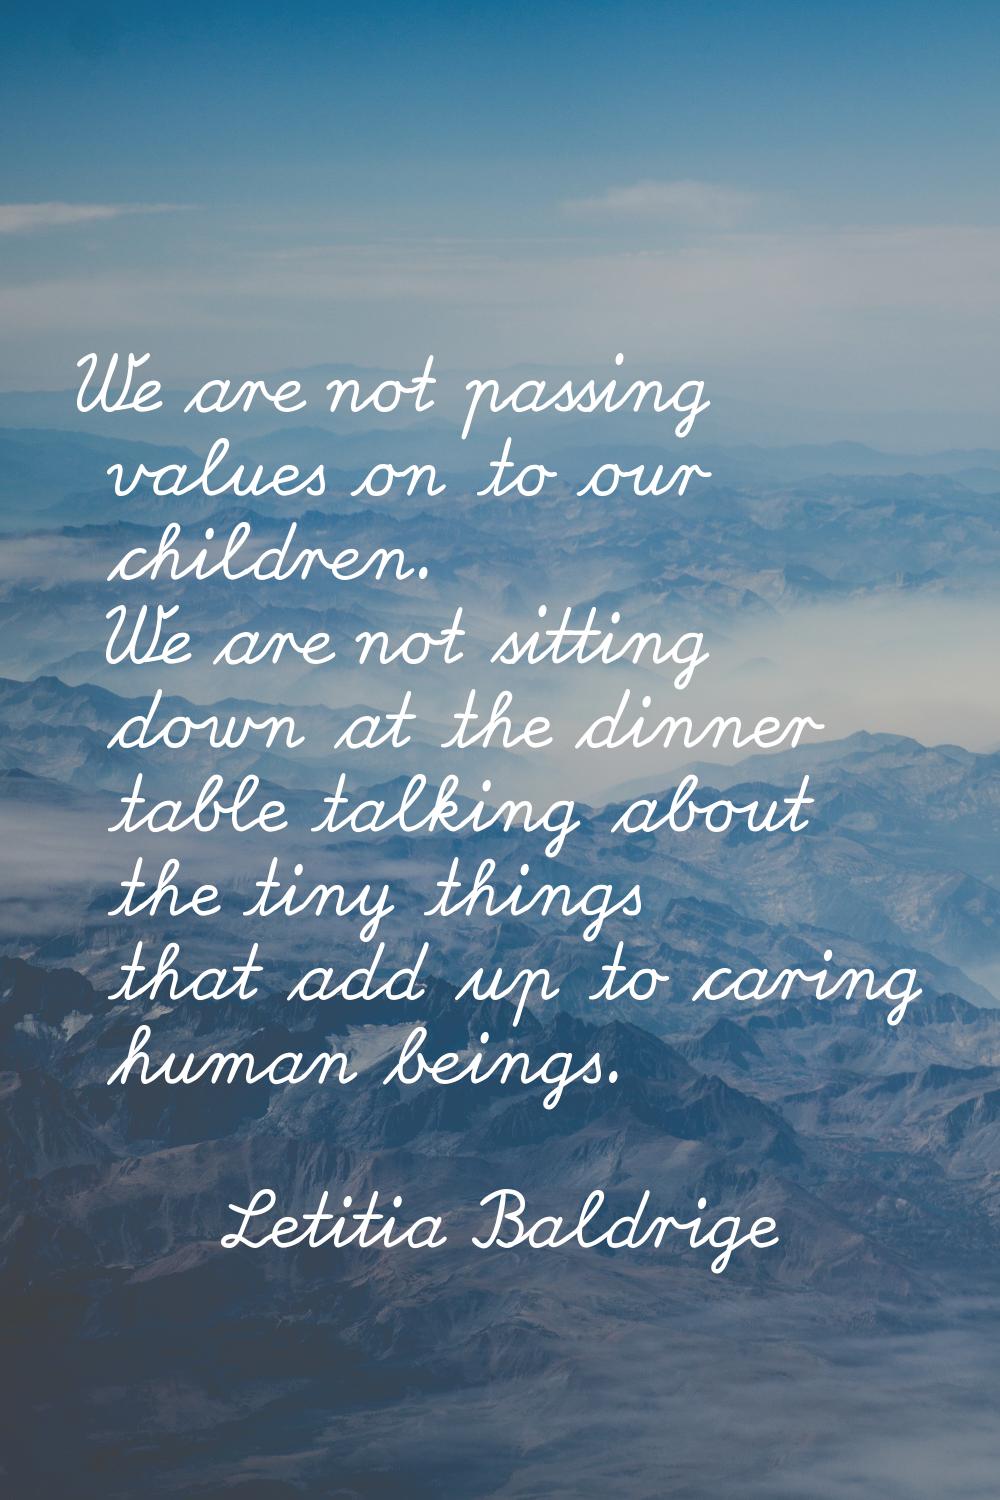 We are not passing values on to our children. We are not sitting down at the dinner table talking a